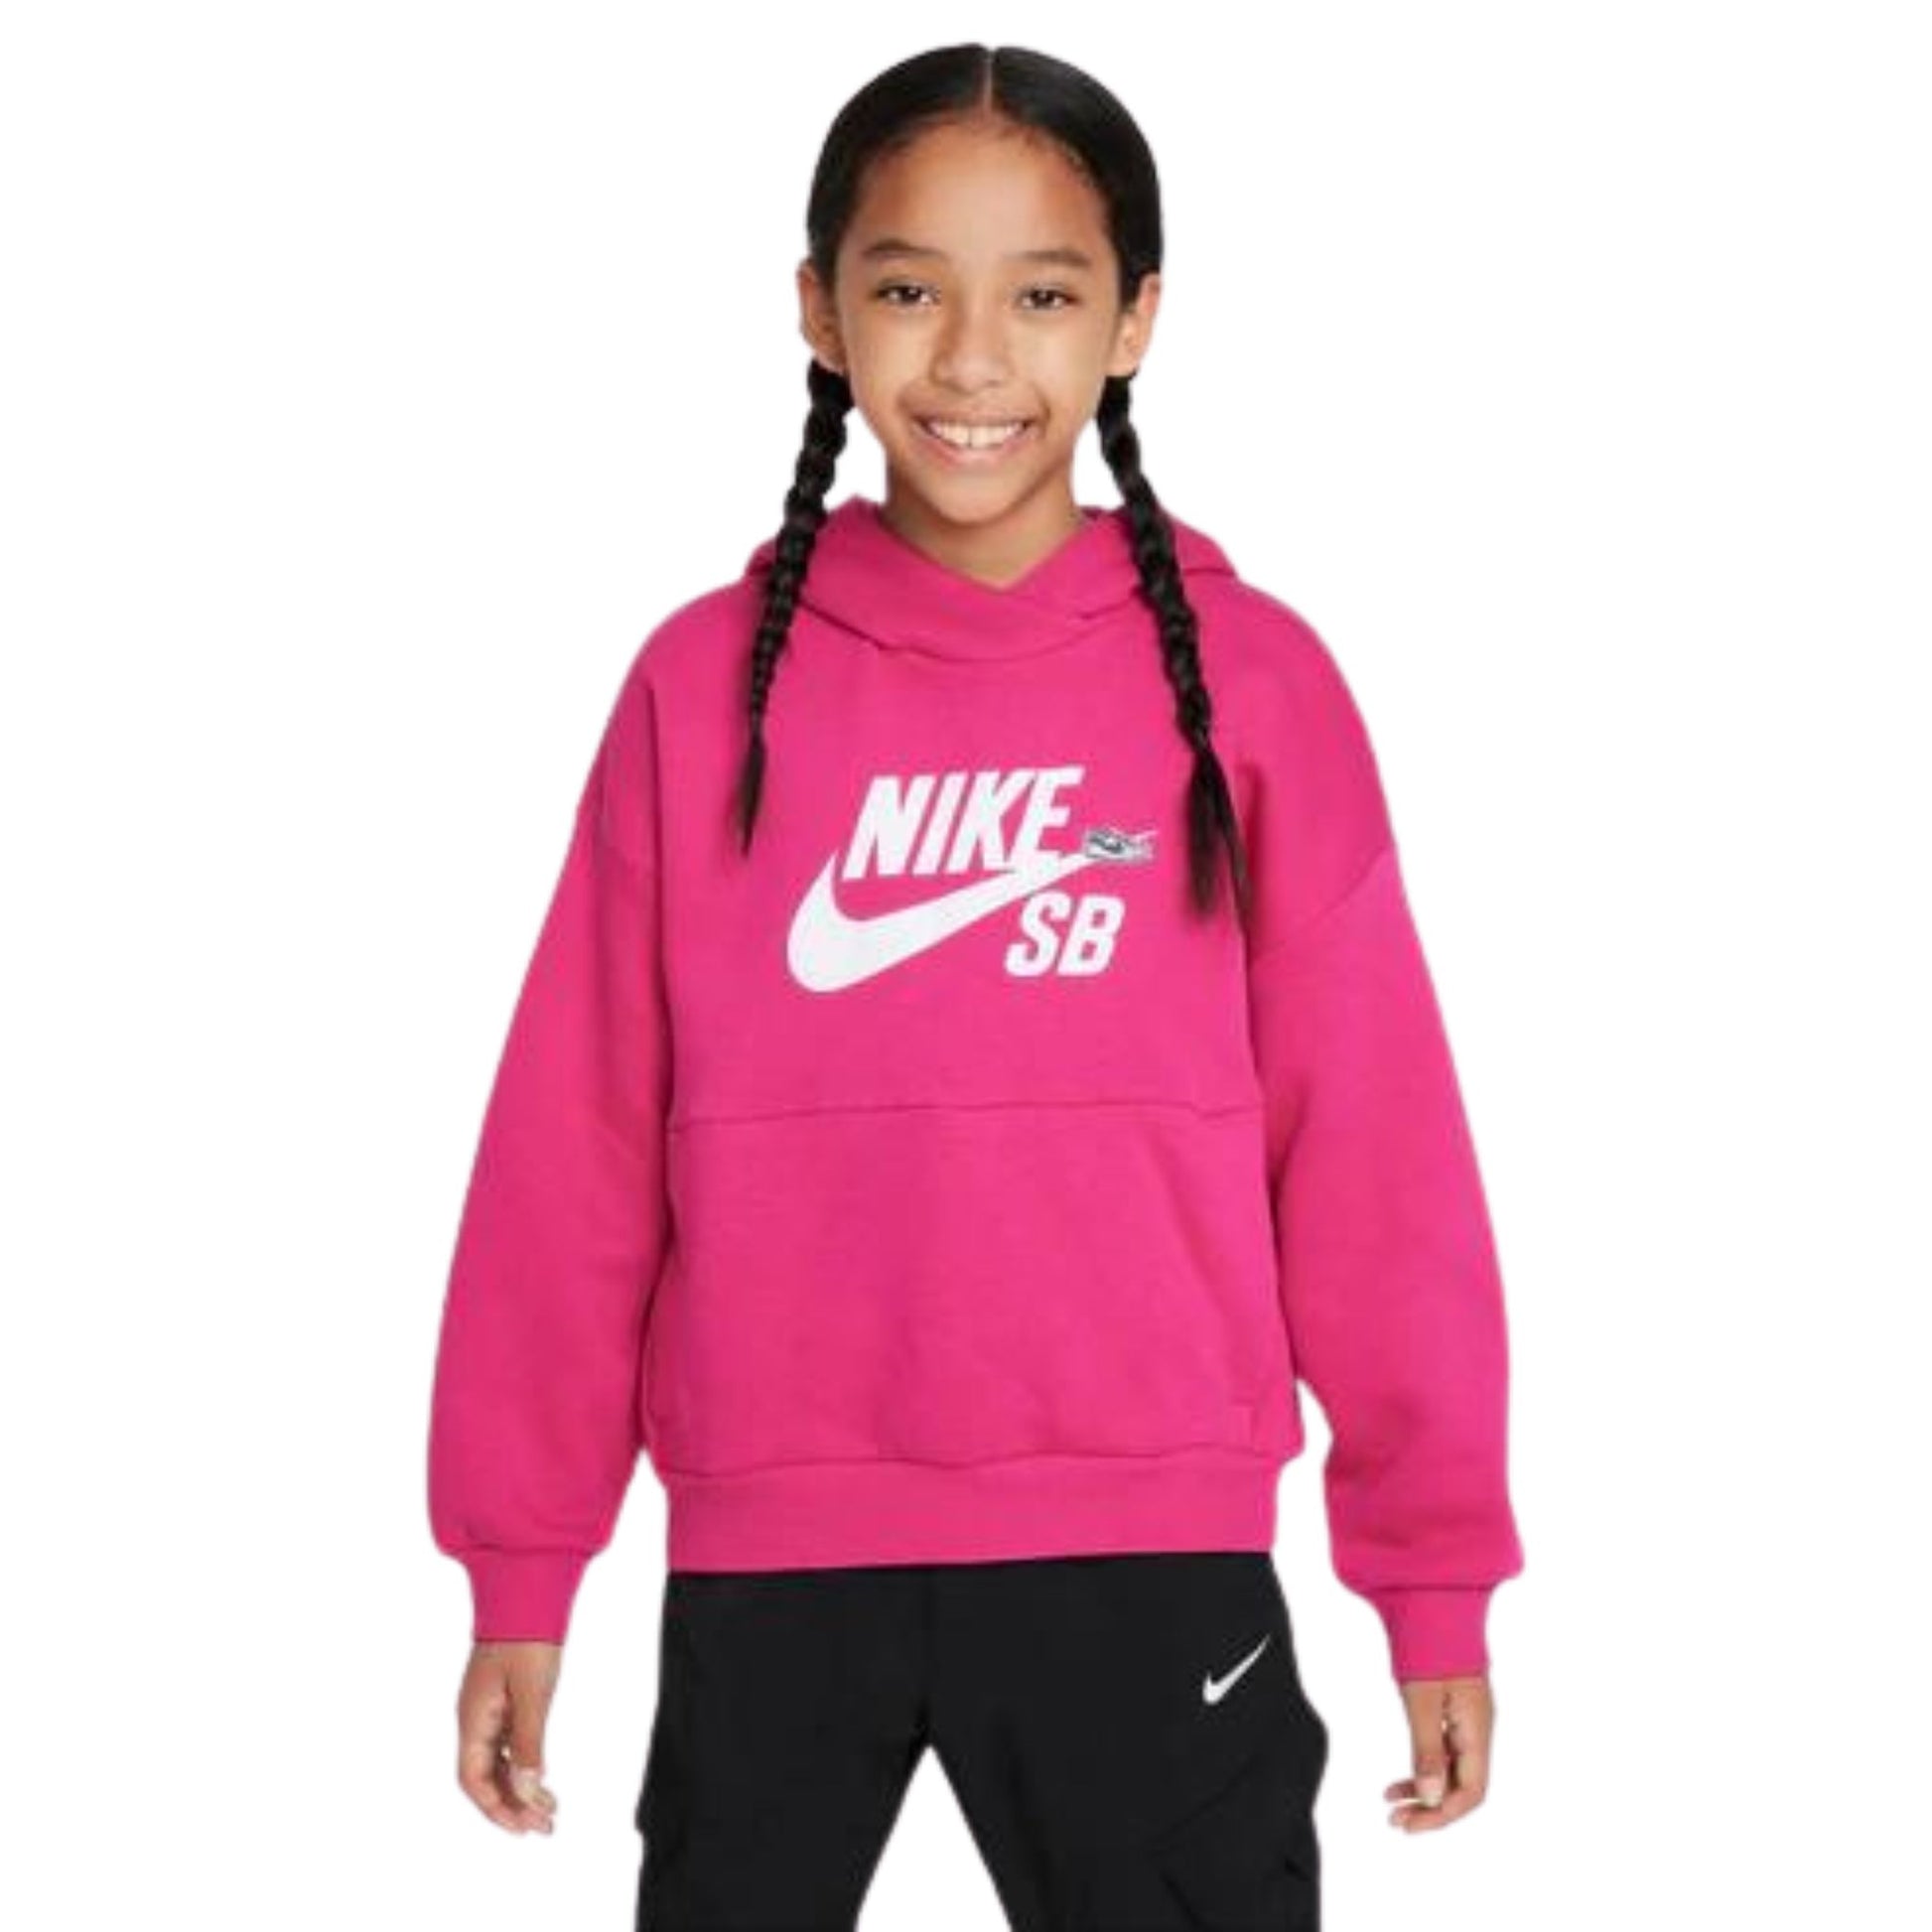 a child with  pink hoodie